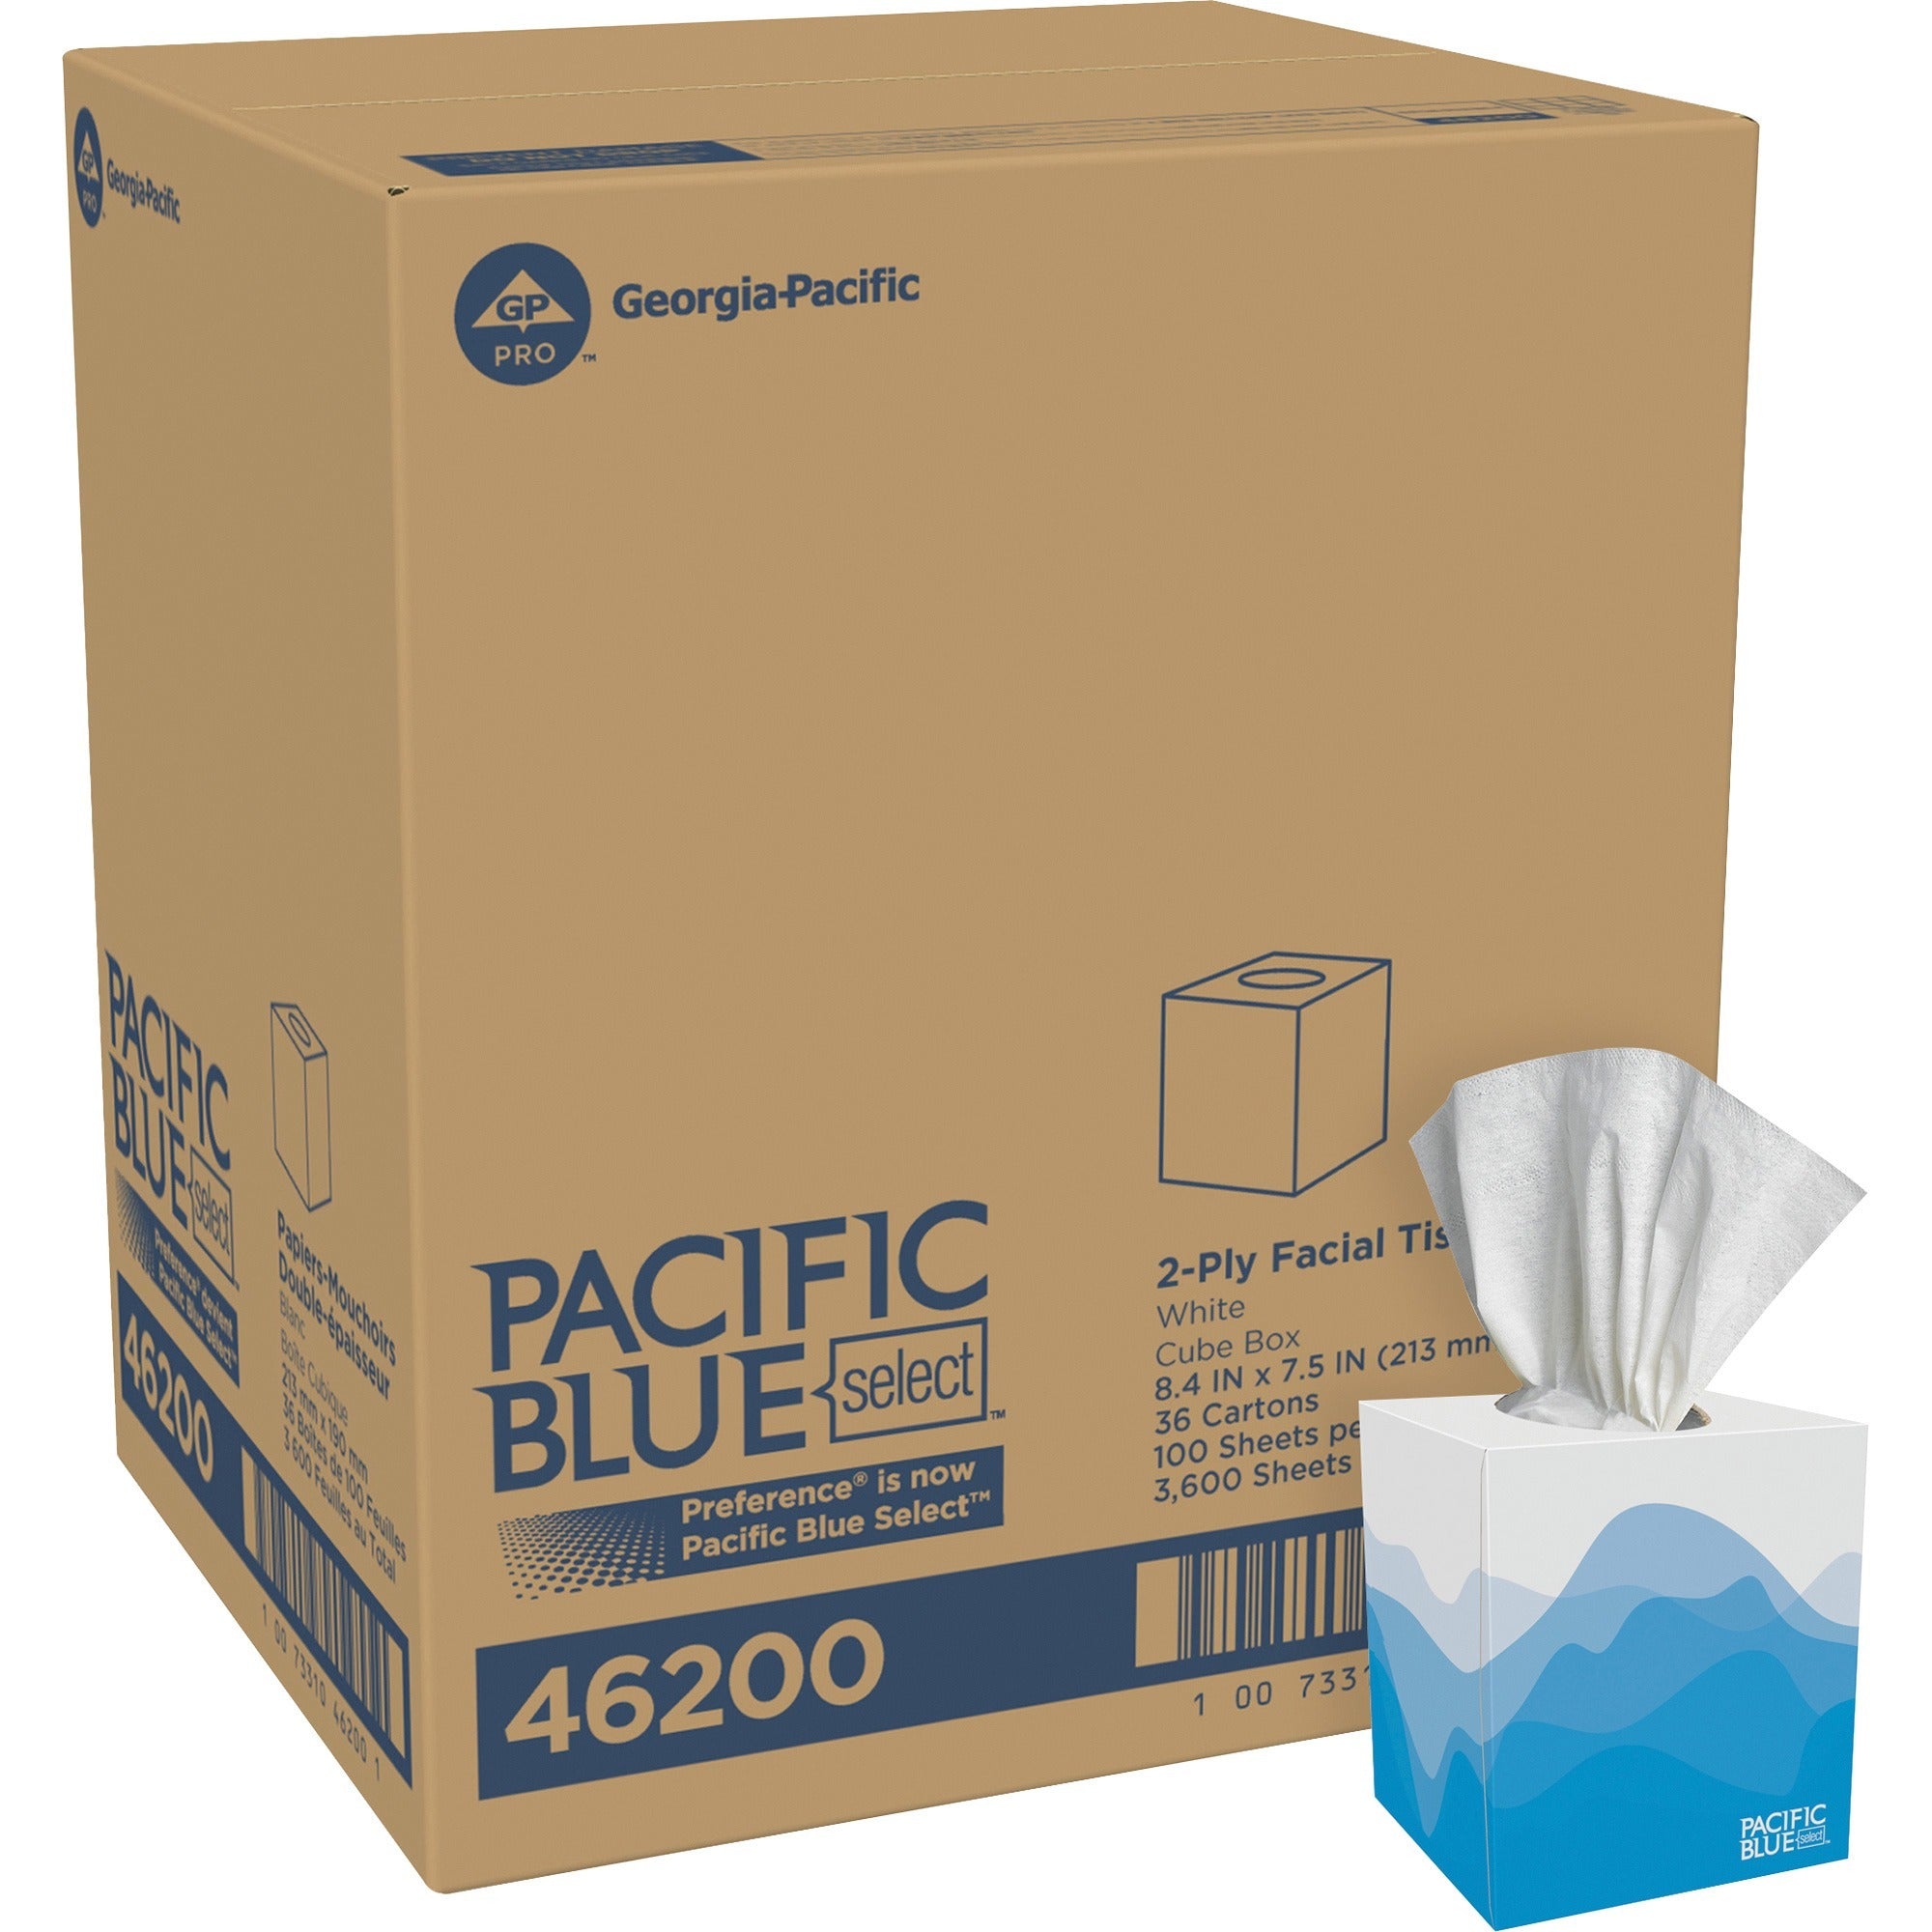 pacific-blue-select-facial-tissue-by-gp-pro-cube-box-2-ply-765-x-885-white-soft-absorbent-100-per-box-36-carton_gpc46200ct - 1